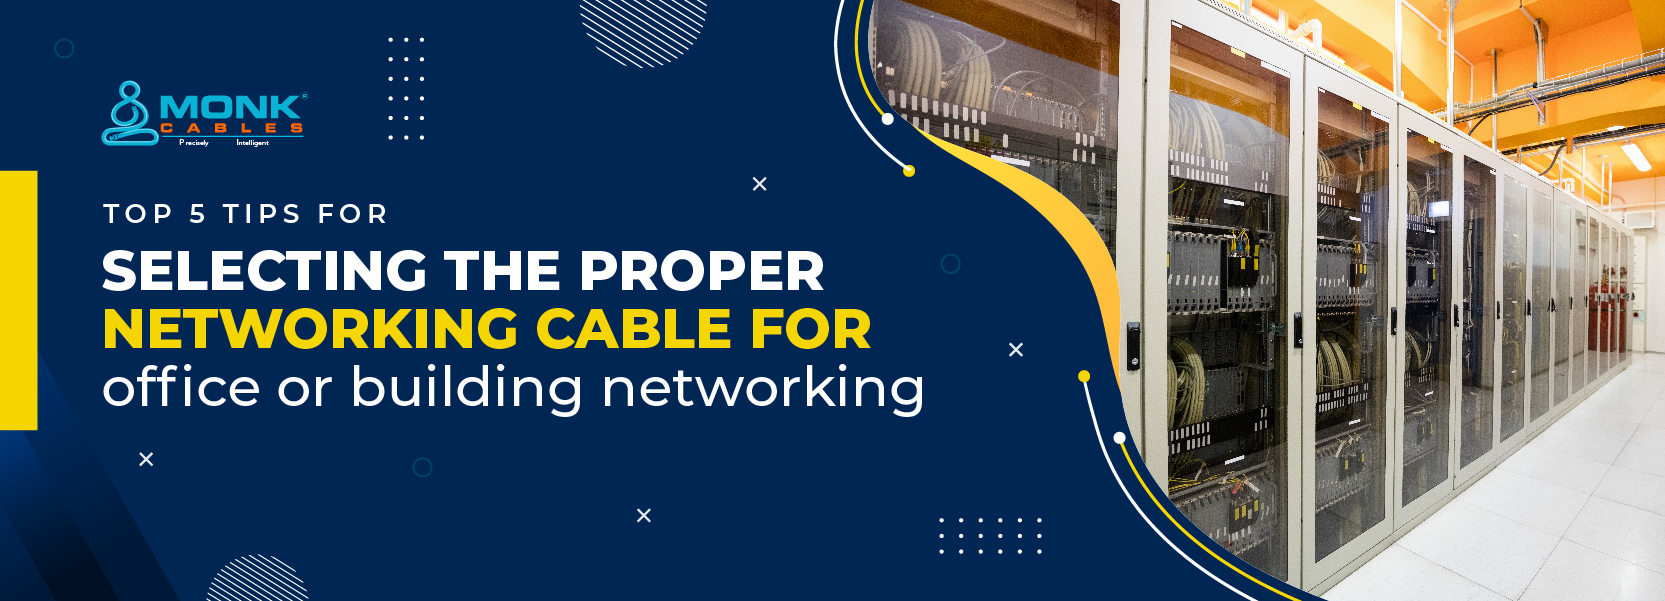 Selecting the Proper Networking Cable for Office or Building Networking